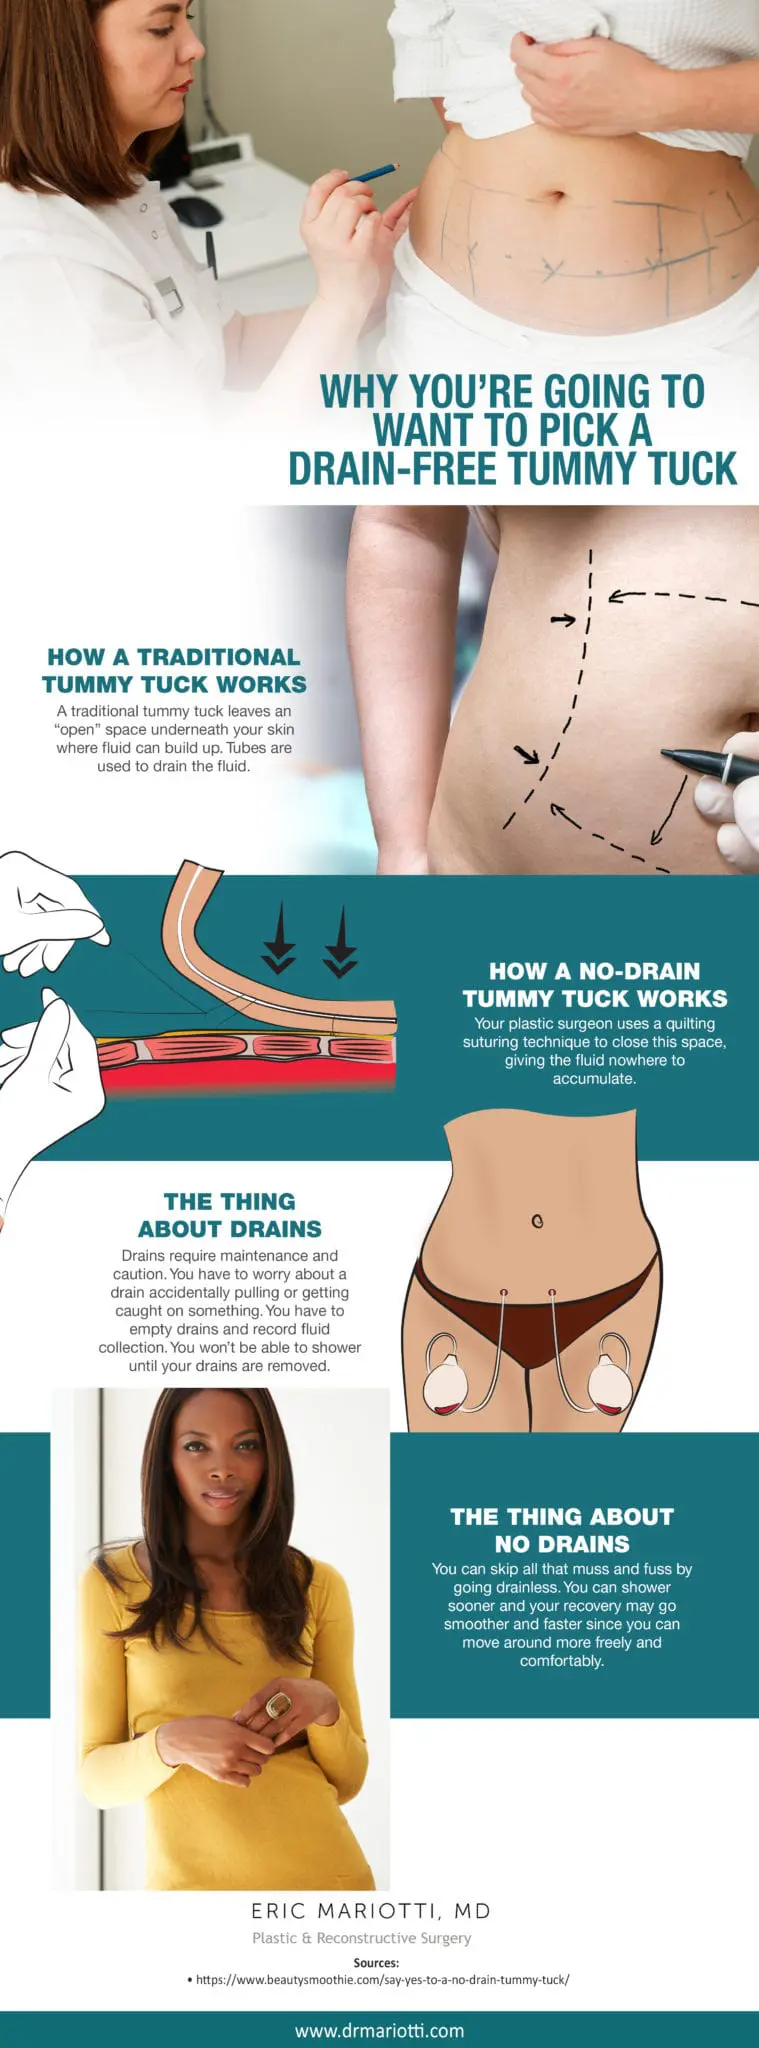 Why You're Going to Want to Pick a Drain-Free Tummy Tuck [Infographic] img 1